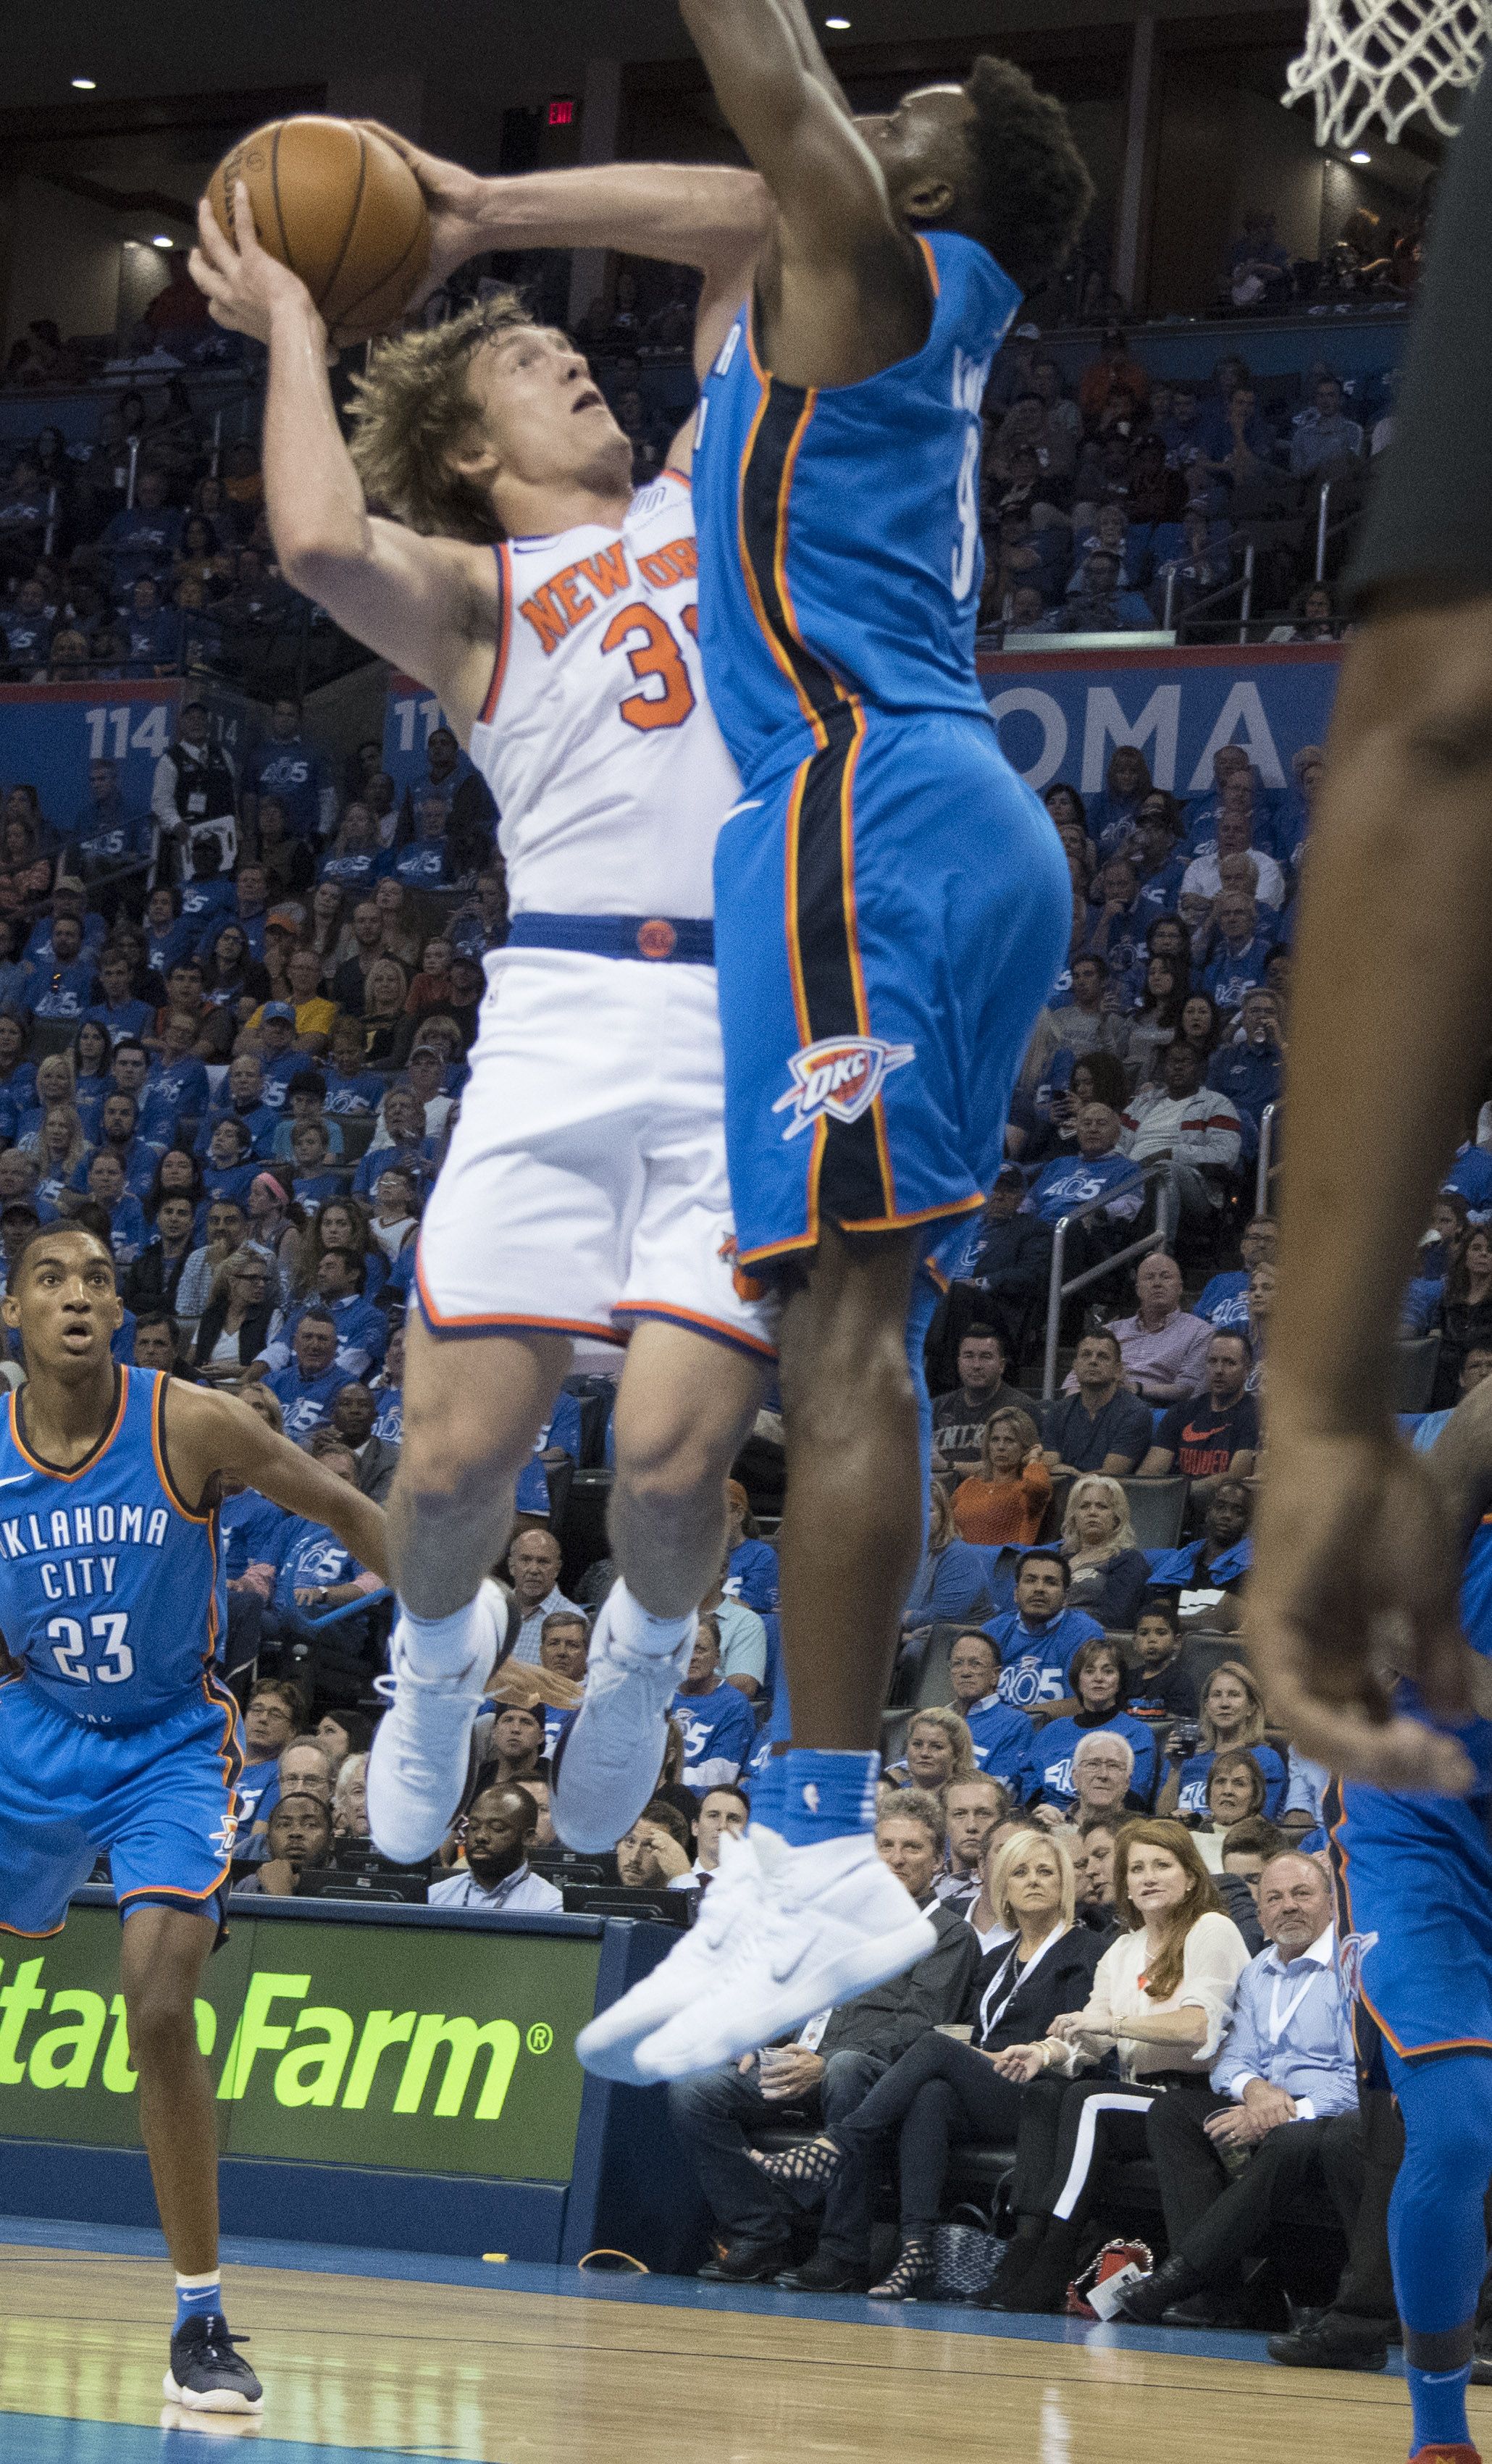 Player grades from the OKC Thunder's season opening win